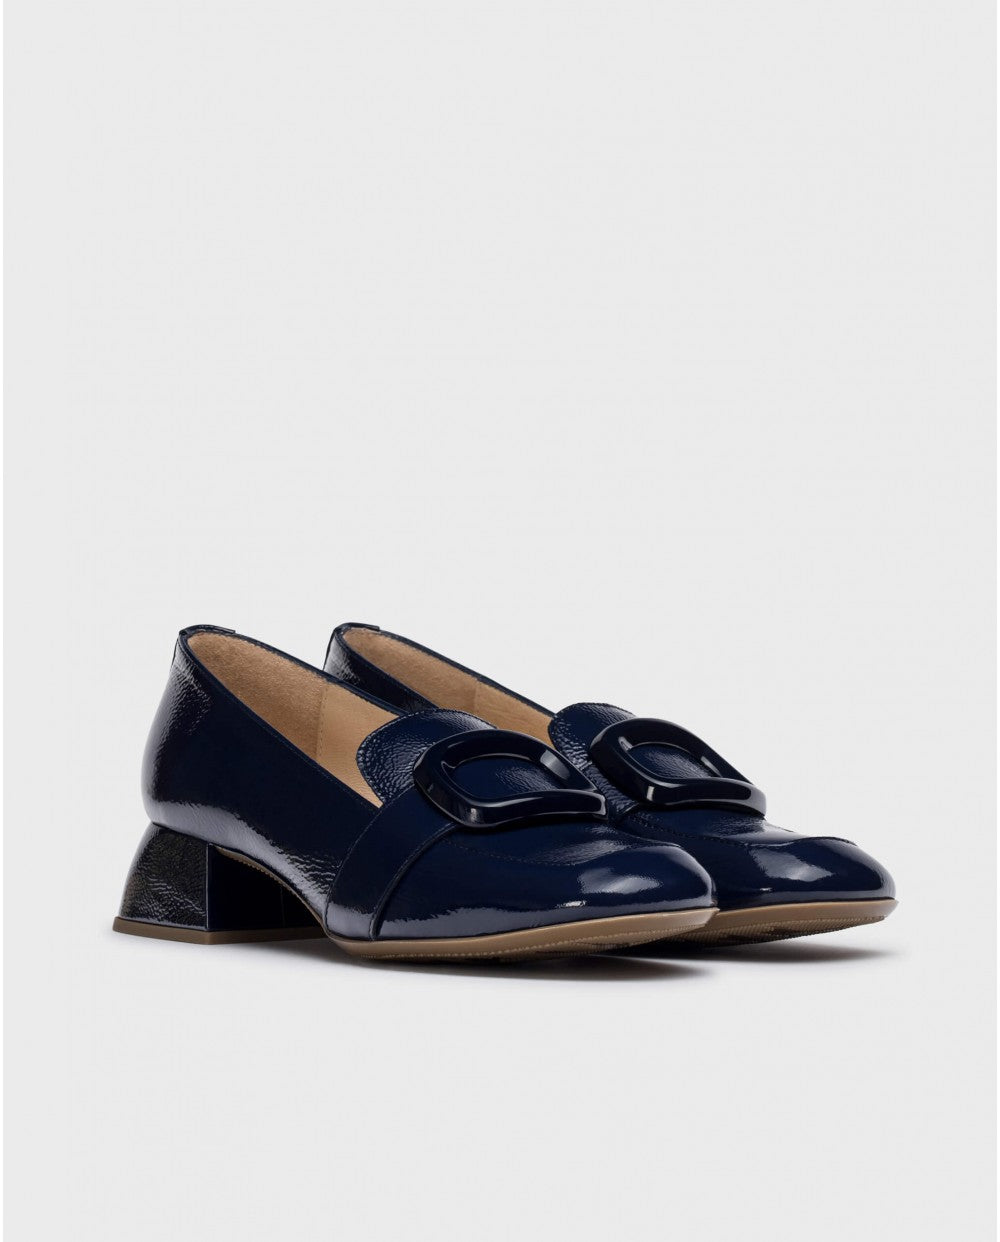 Wonders - D-1203 Navy Patent Loafer